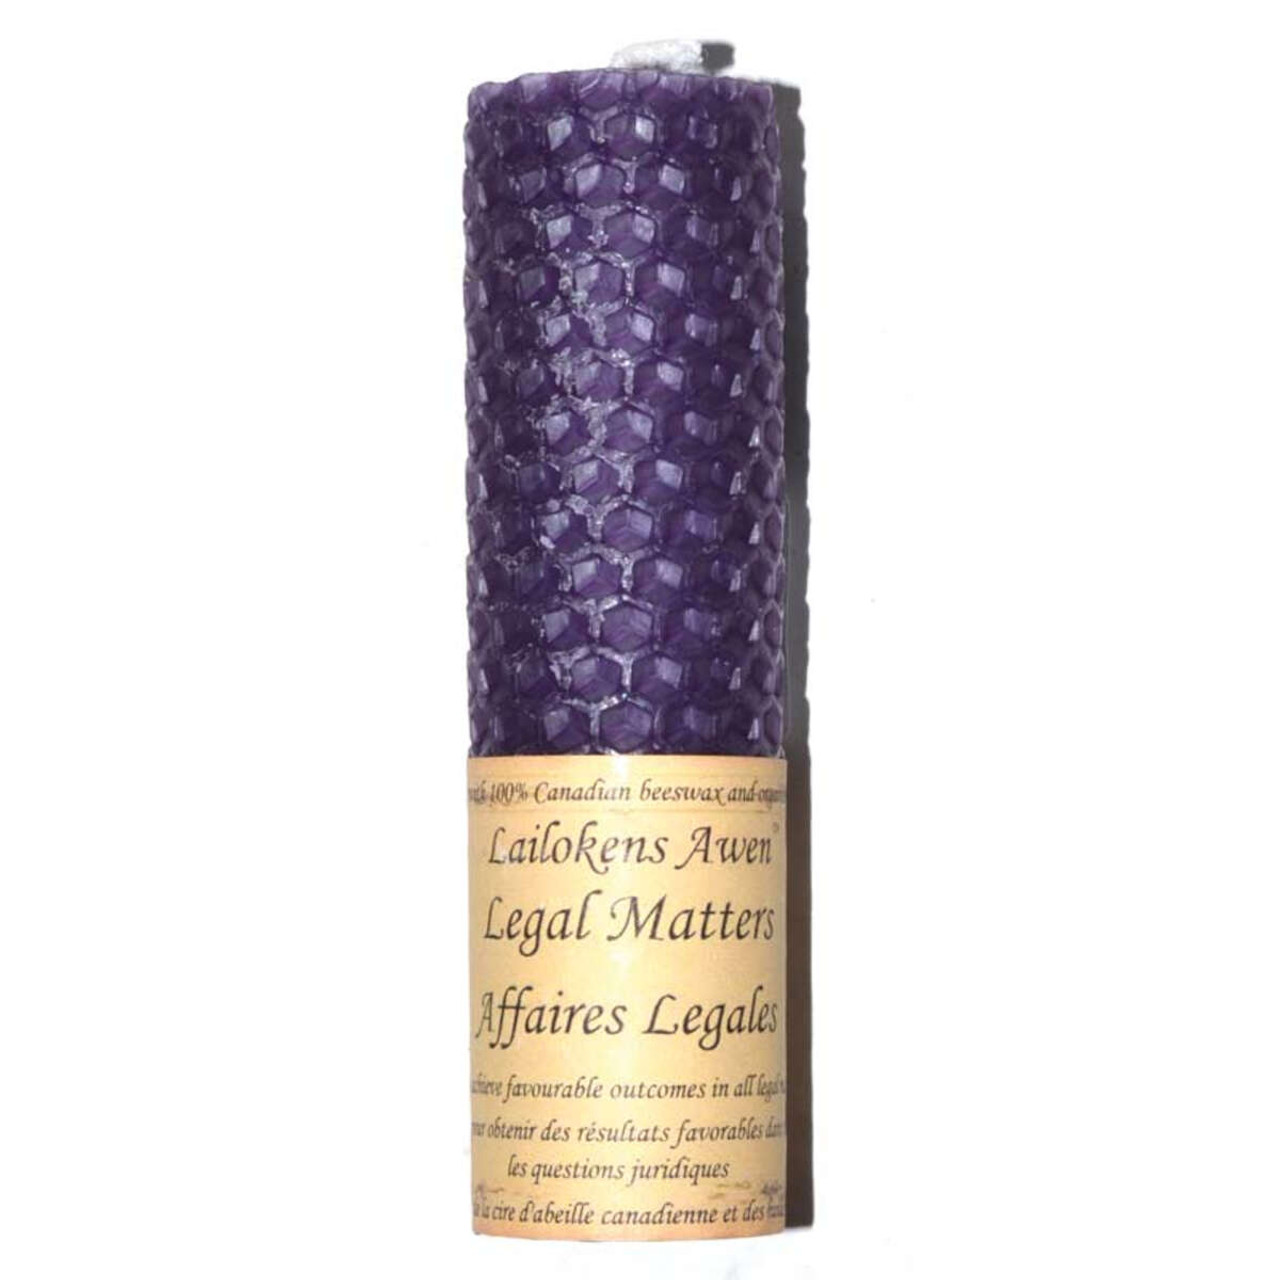 Legal Matters Lailokens Awen Candle 4 1/4"